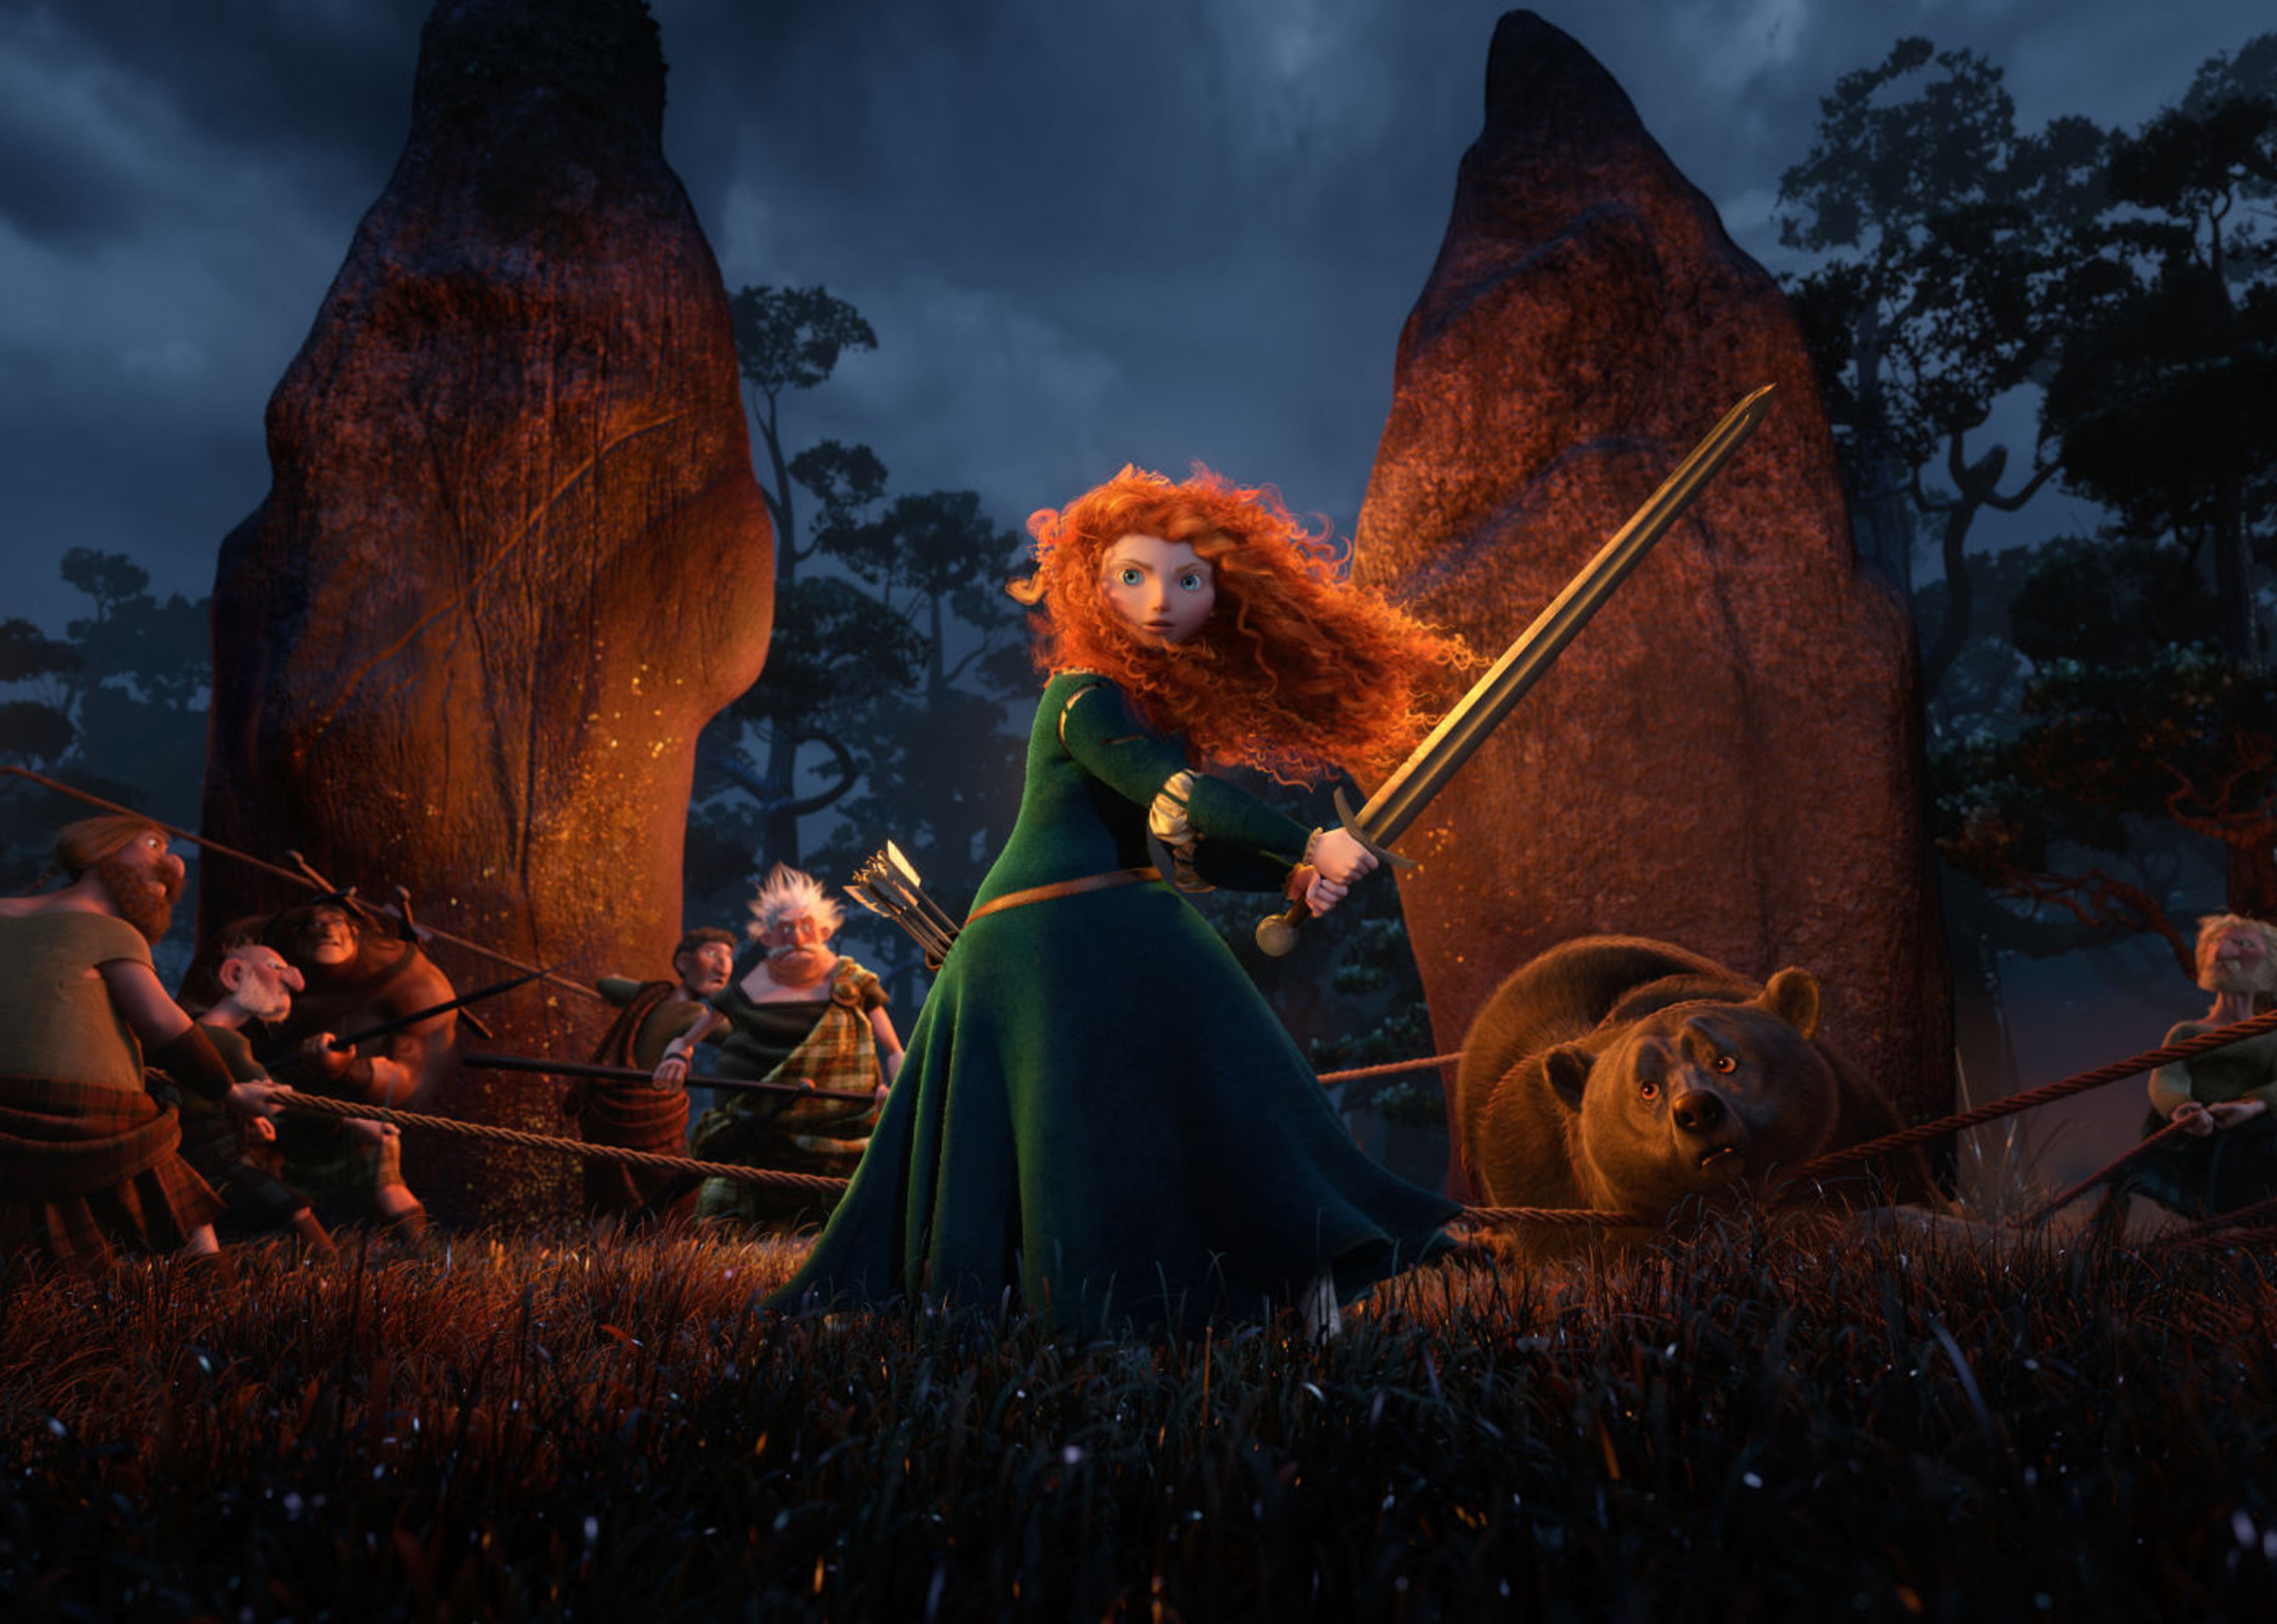 A red-headed woman bears a sword near a bear in a forested area